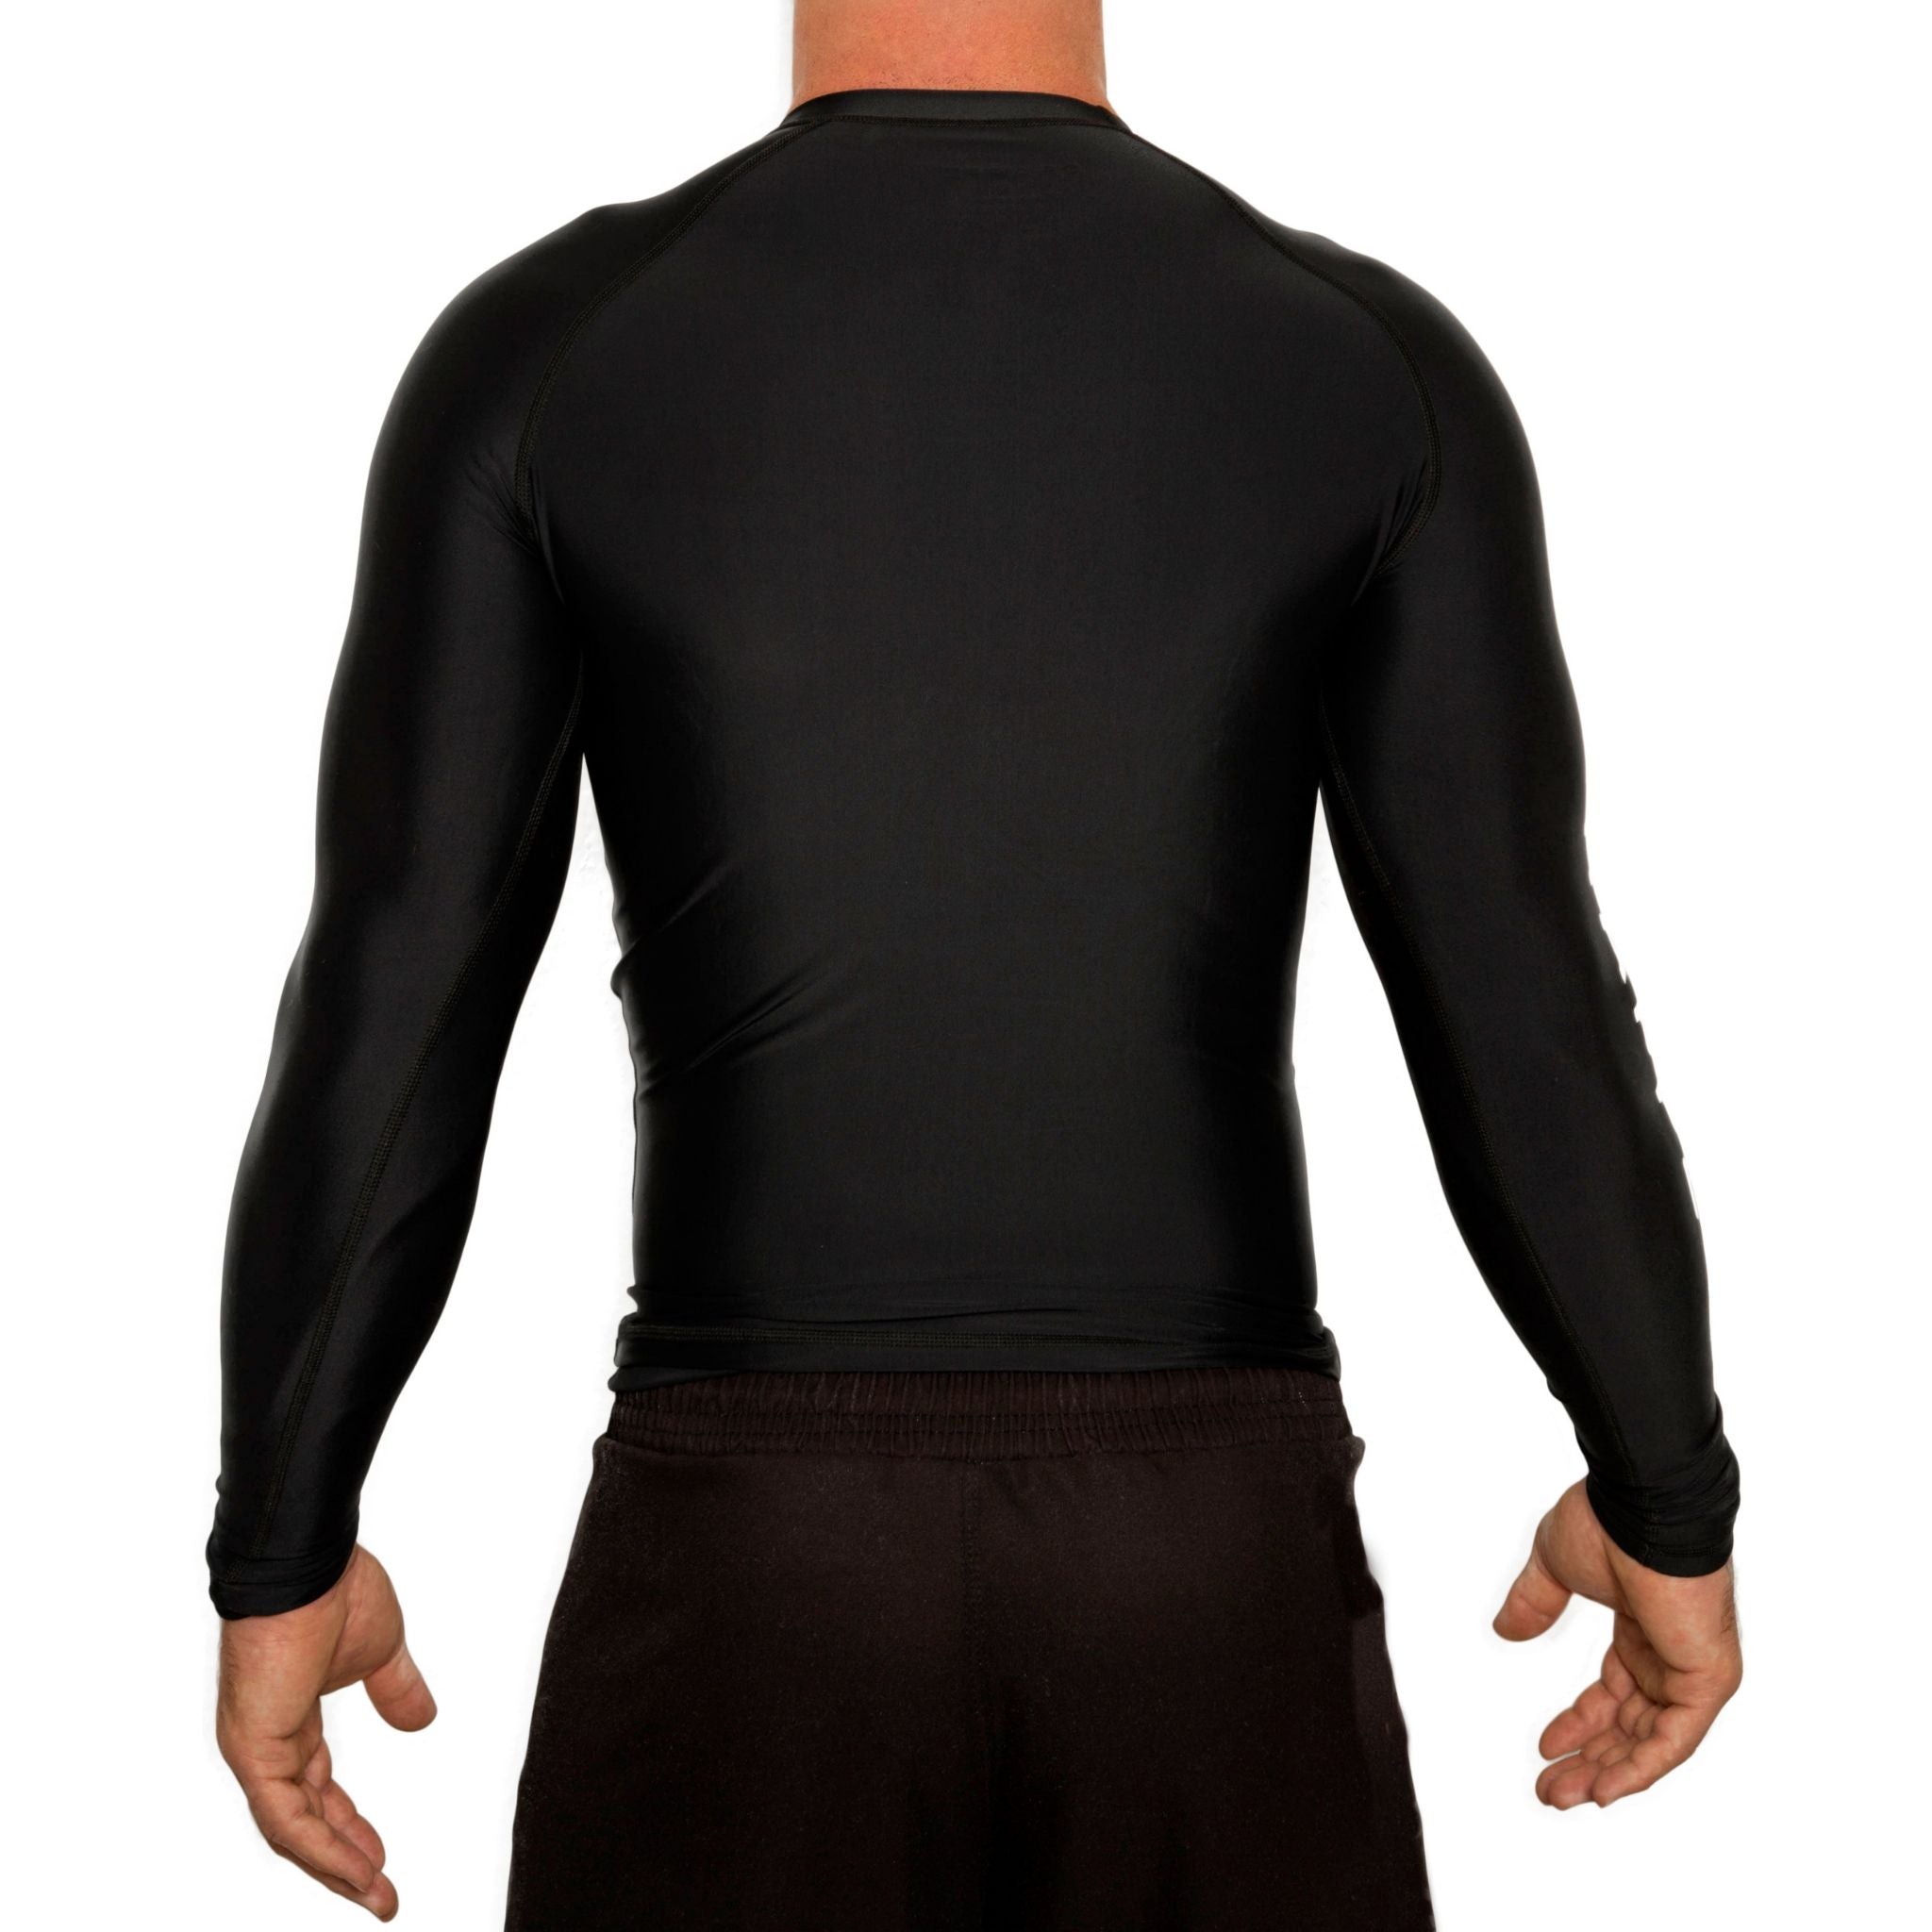 Rashguard - Long Sleeve Athletic Compression Shirt - Base layer - By G –  GRAPPZ